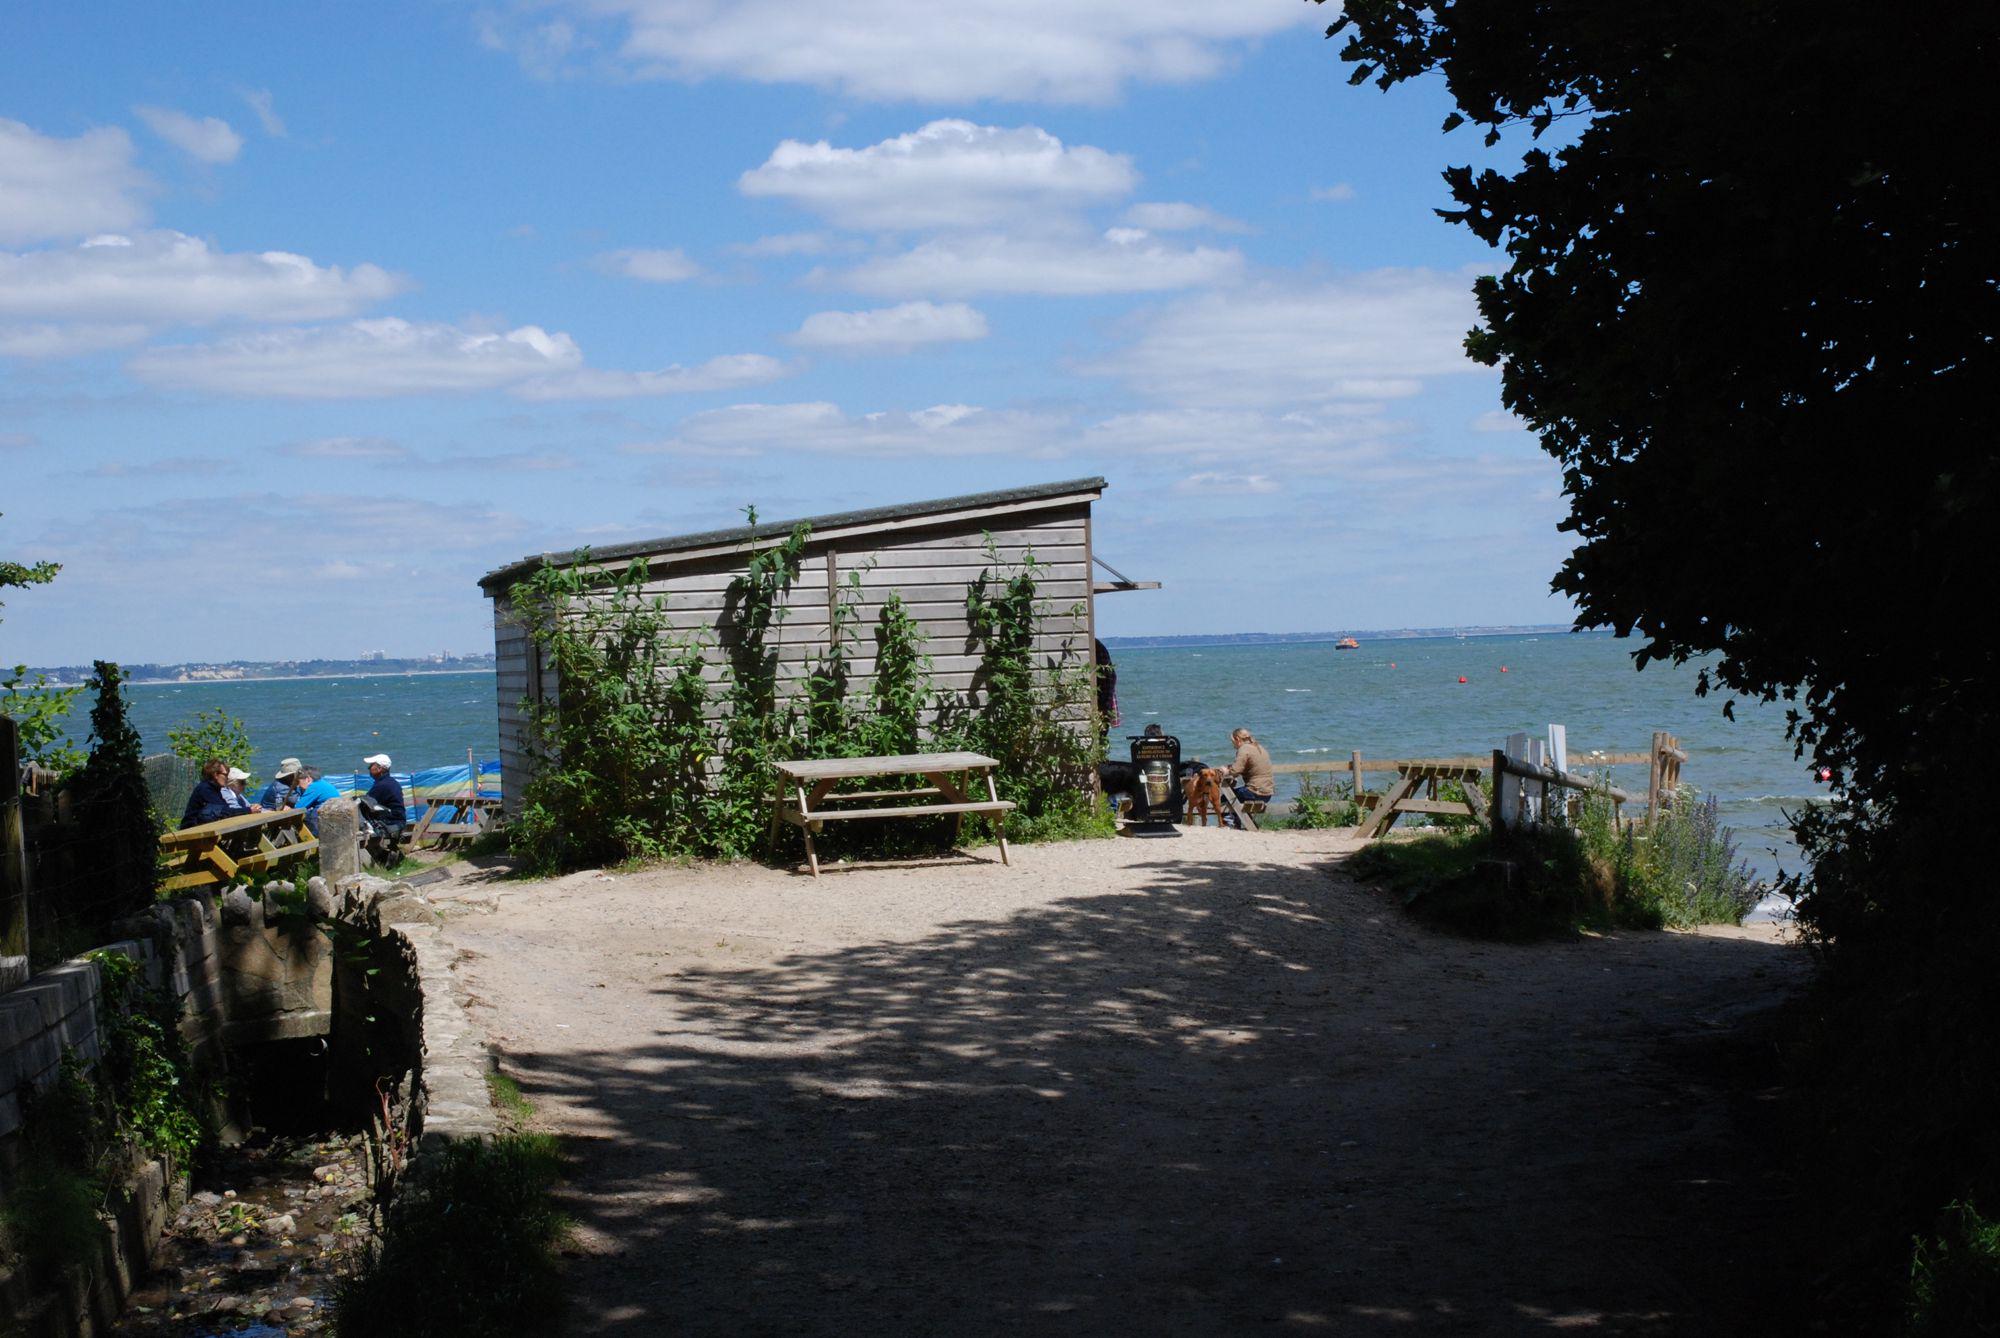 Hotels, Cottages, B&Bs & Glamping in East Dorset